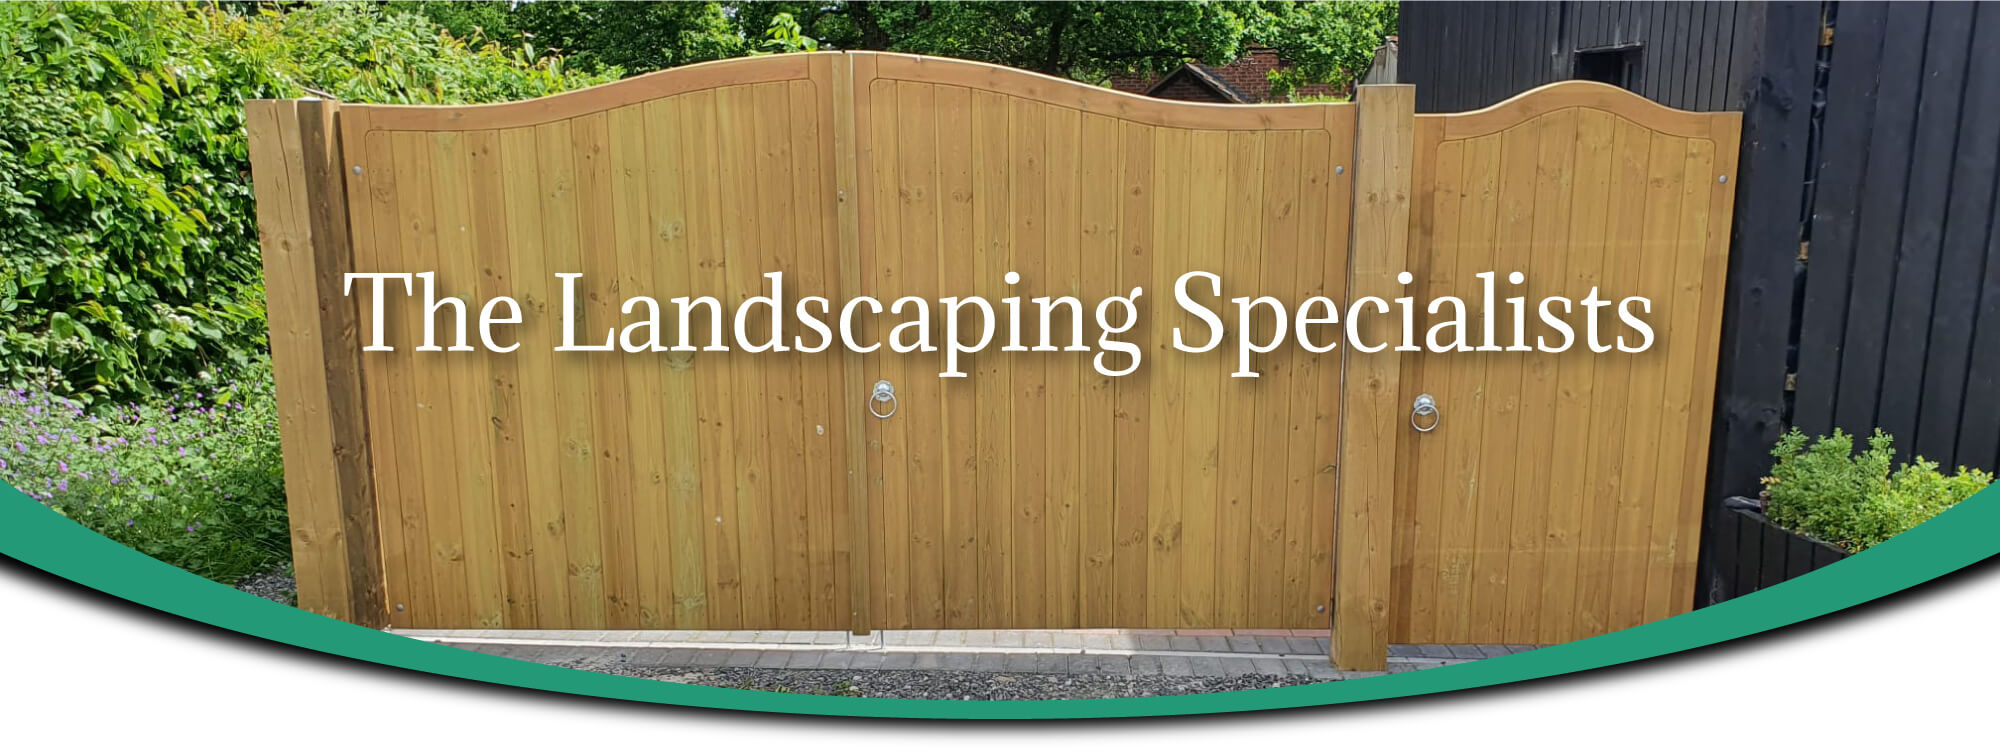 Vertical tongue and groove fence panels